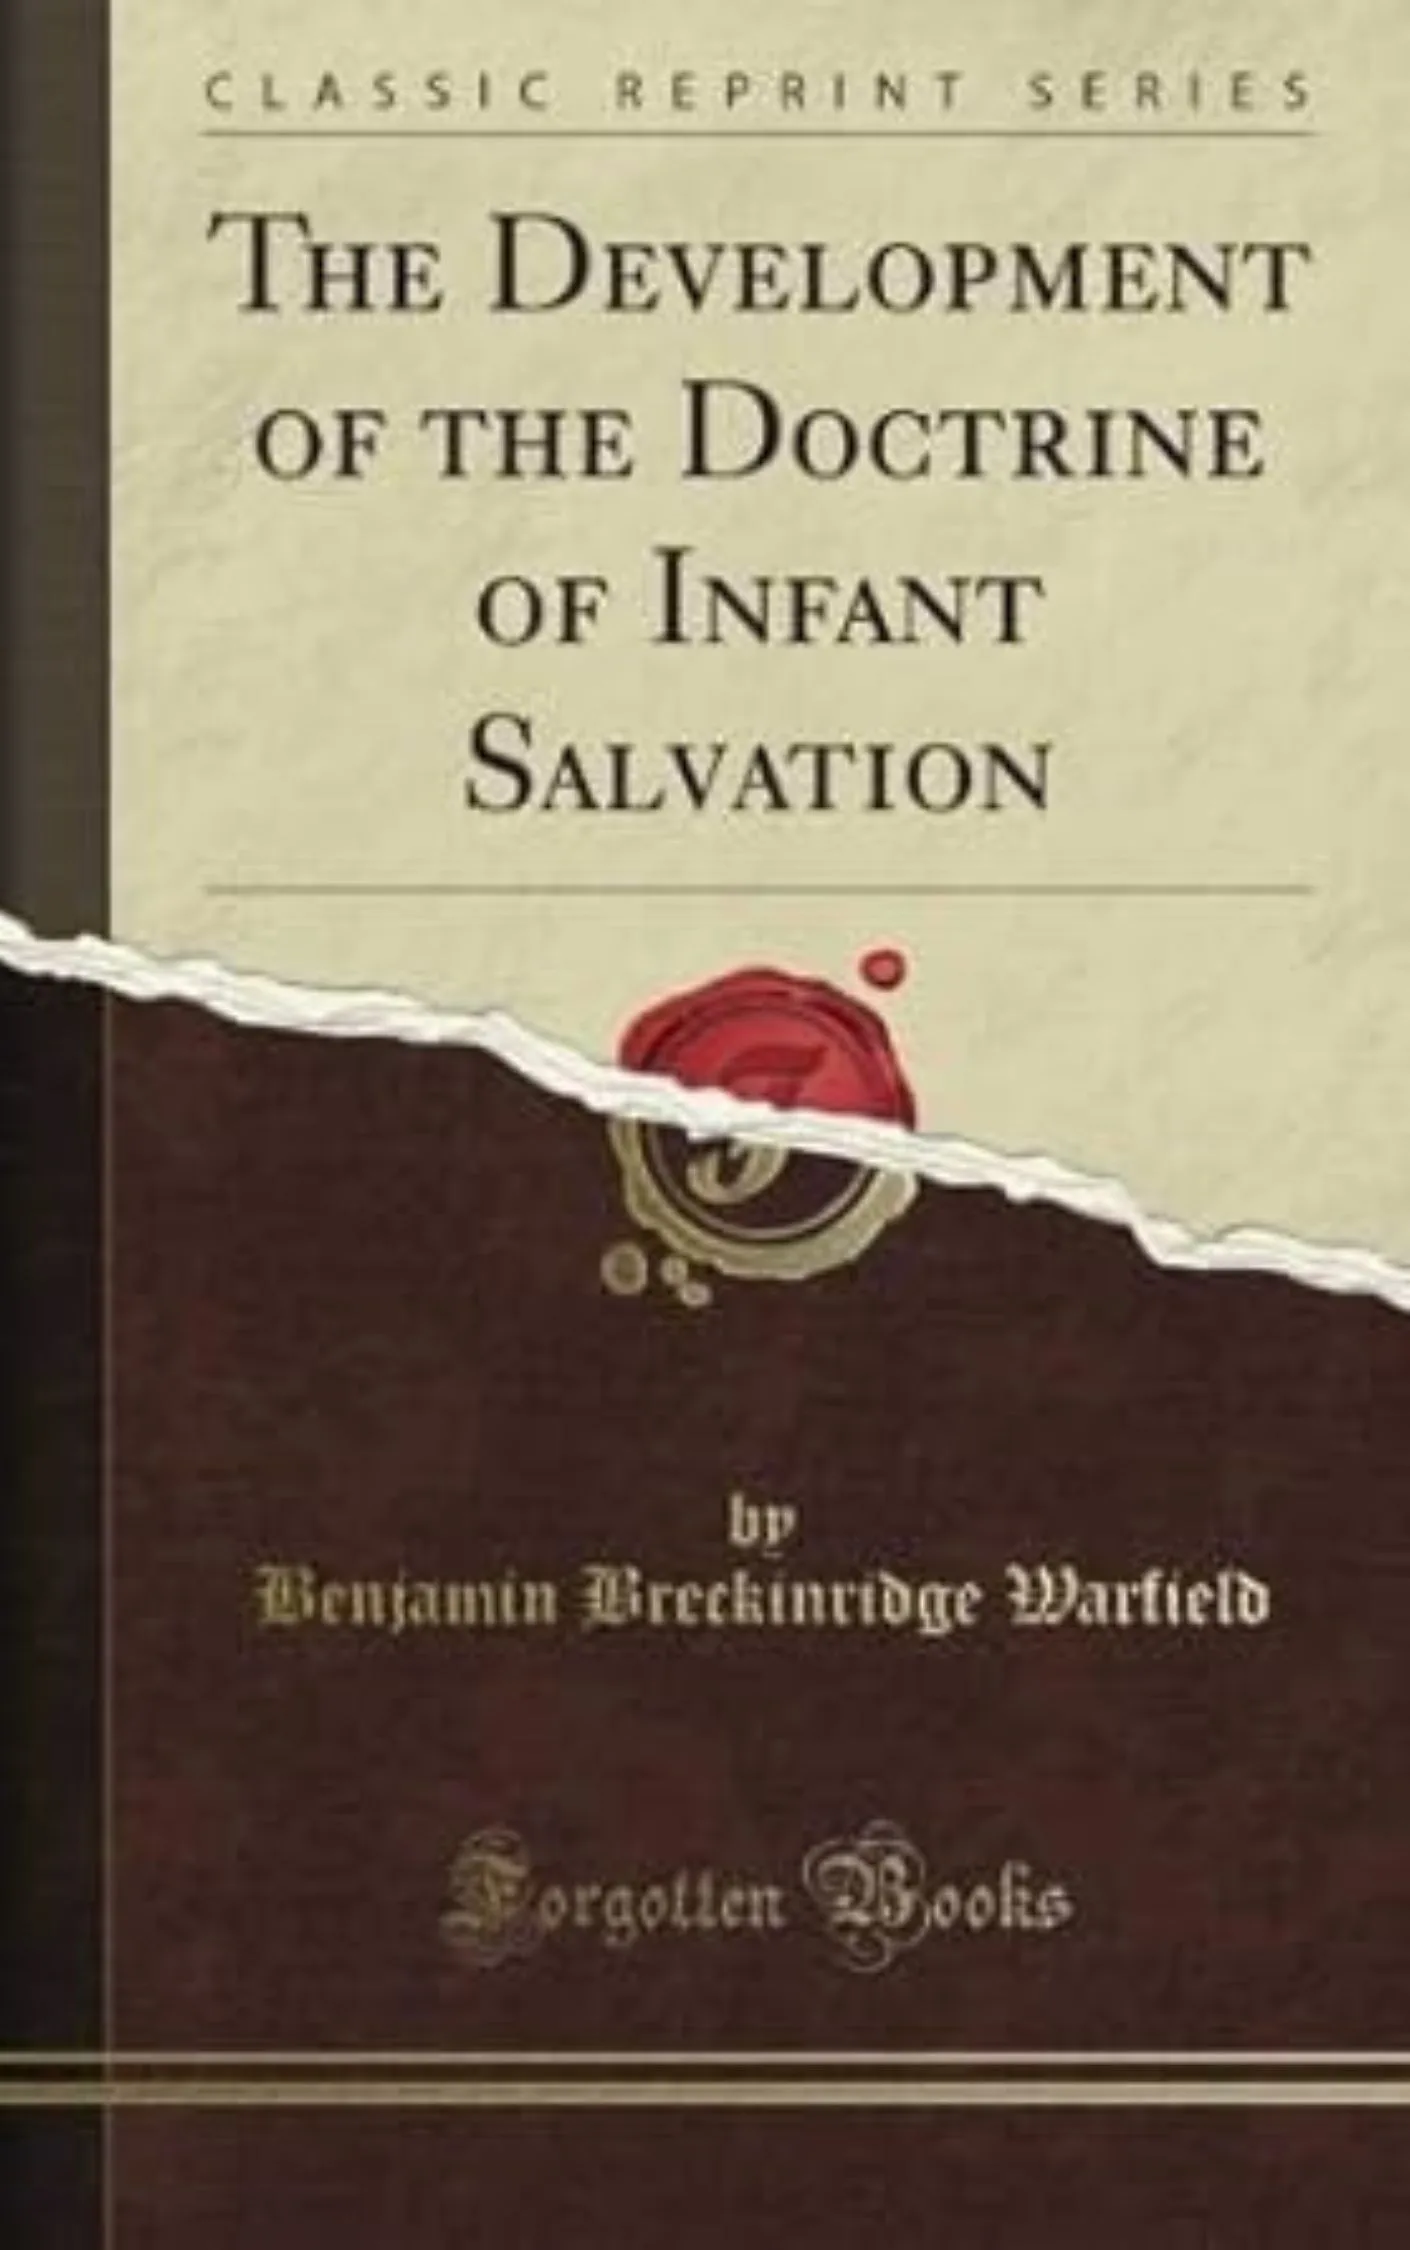 The Development of the Doctrine of Infant Salvation by Benjamin B. Warfield